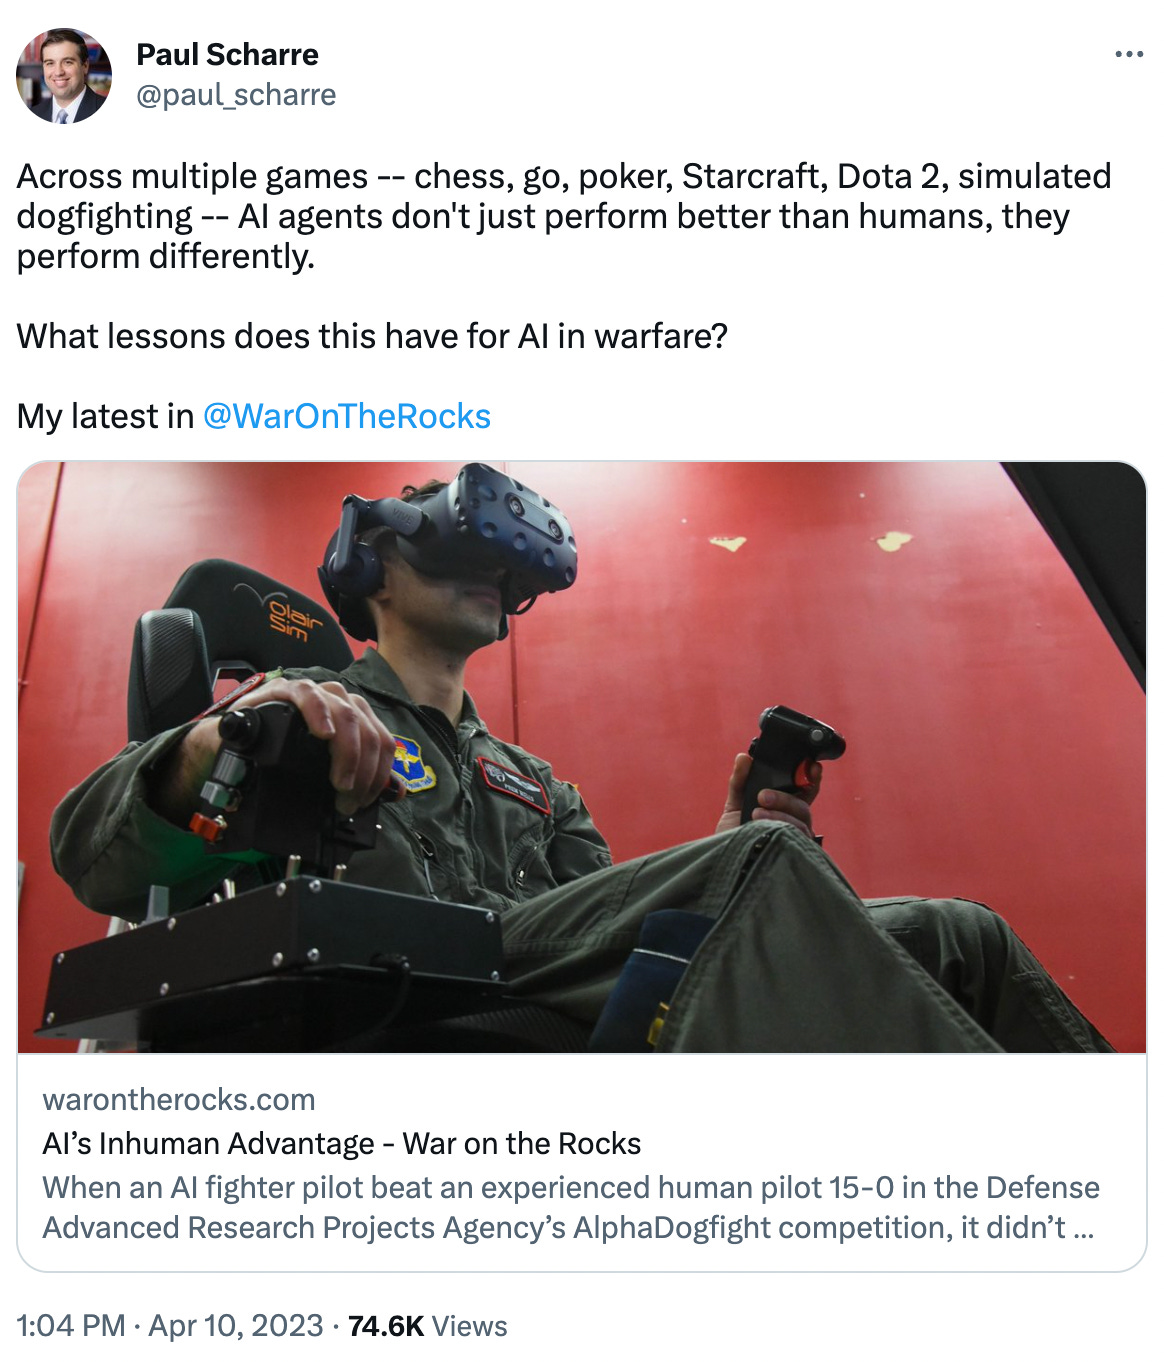 Across multiple games -- chess, go, poker, Starcraft, Dota 2, simulated dogfighting -- AI agents don't just perform better than humans, they perform differently.   What lessons does this have for AI in warfare?  My latest in  @WarOnTheRocks warontherocks.com AI’s Inhuman Advantage - War on the Rocks When an AI fighter pilot beat an experienced human pilot 15-0 in the Defense Advanced Research Projects Agency’s AlphaDogfight competition, it didn’t just